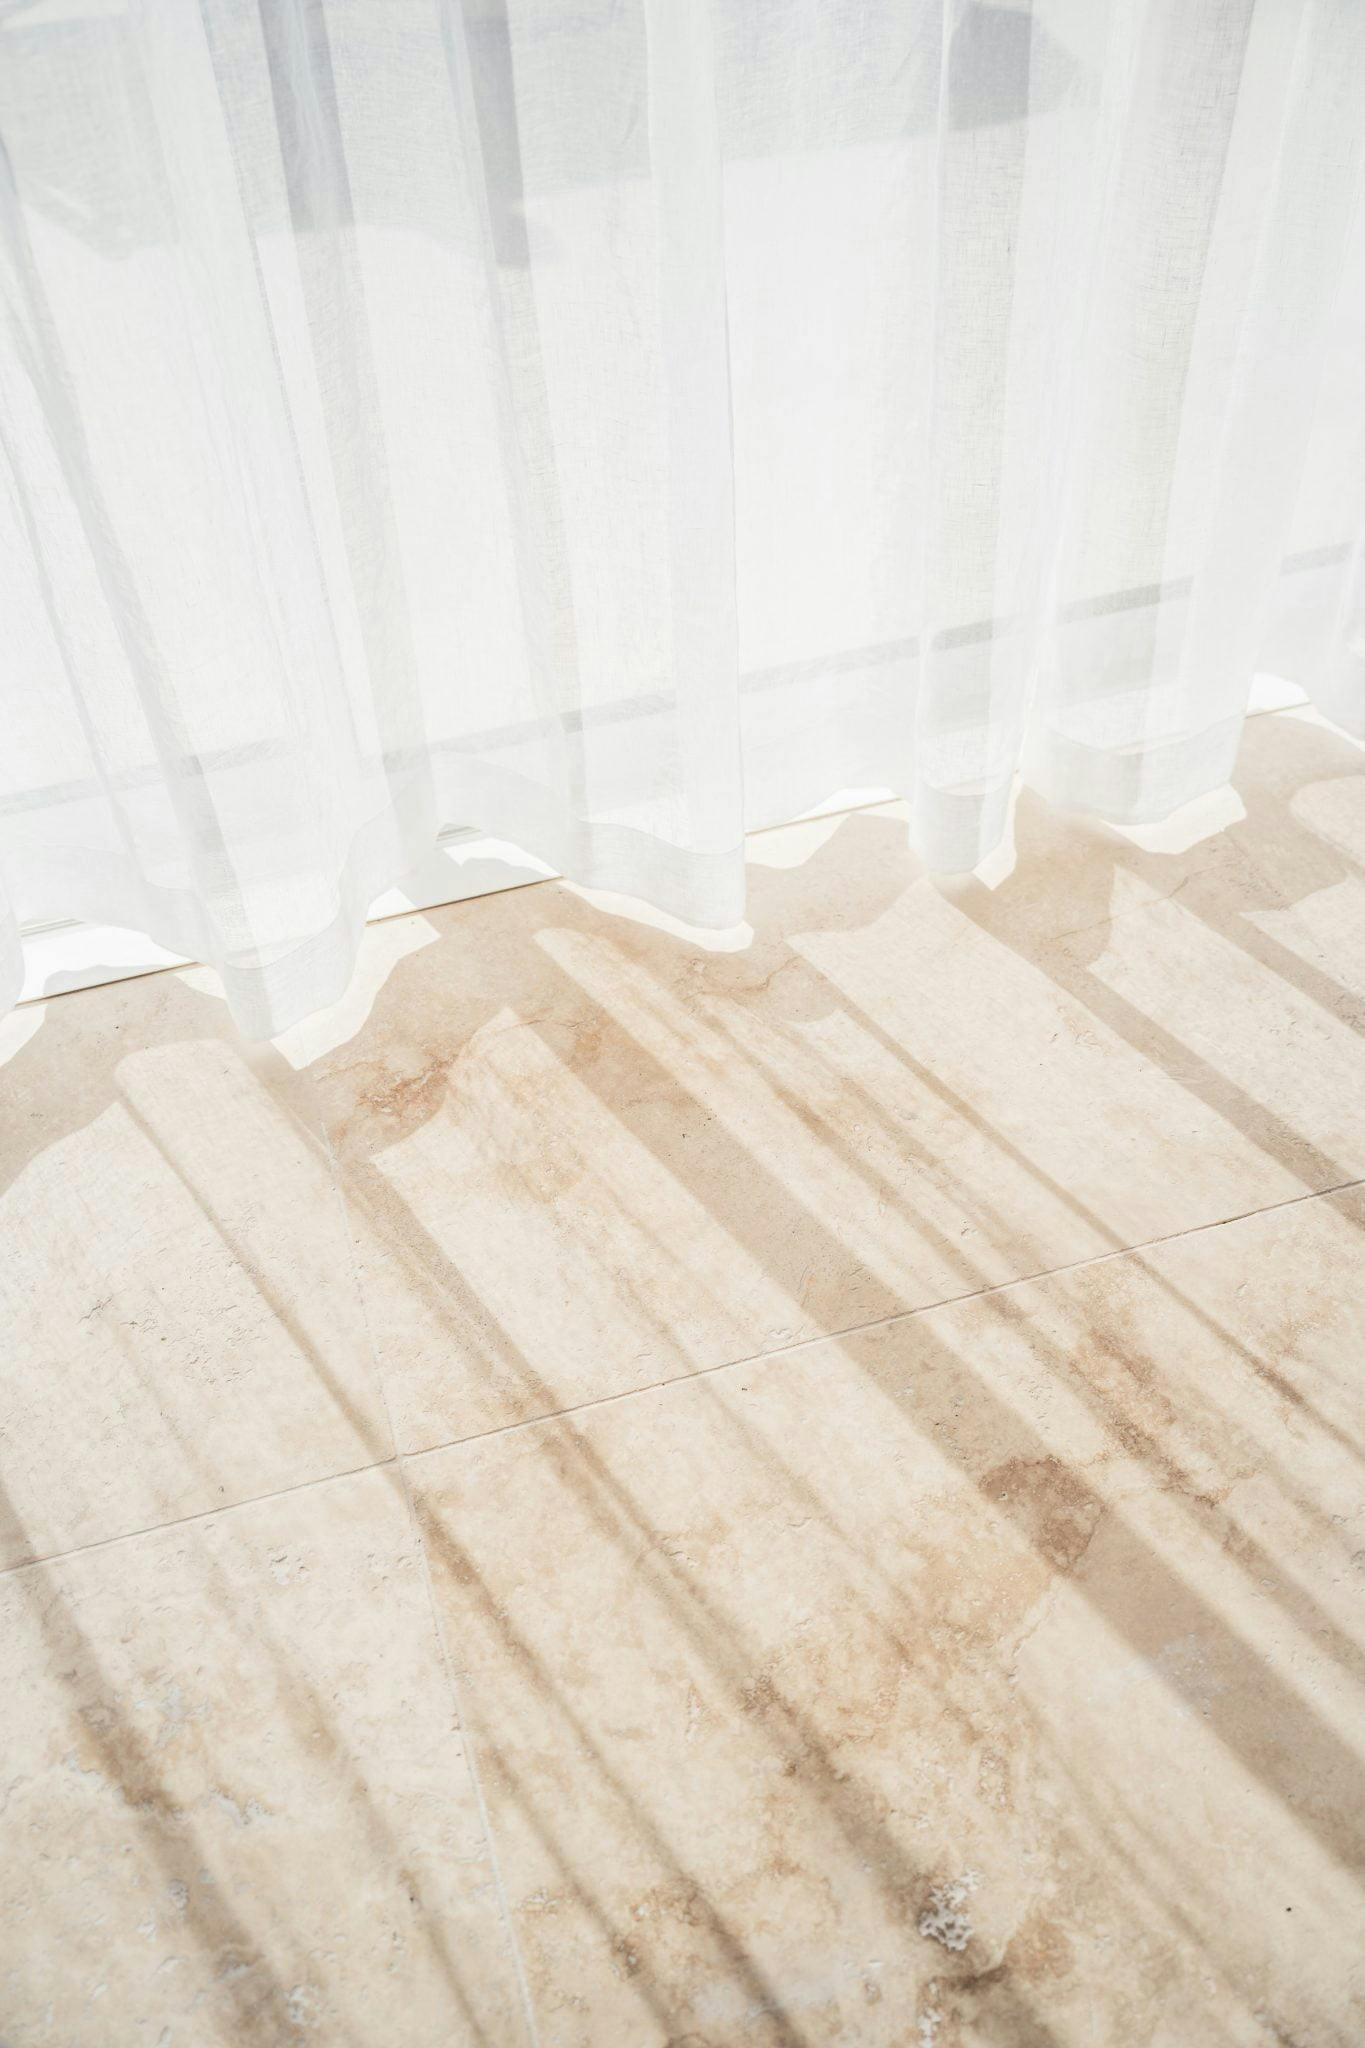 Detail of the light streaming onto the floor through the curtains, casting shadows